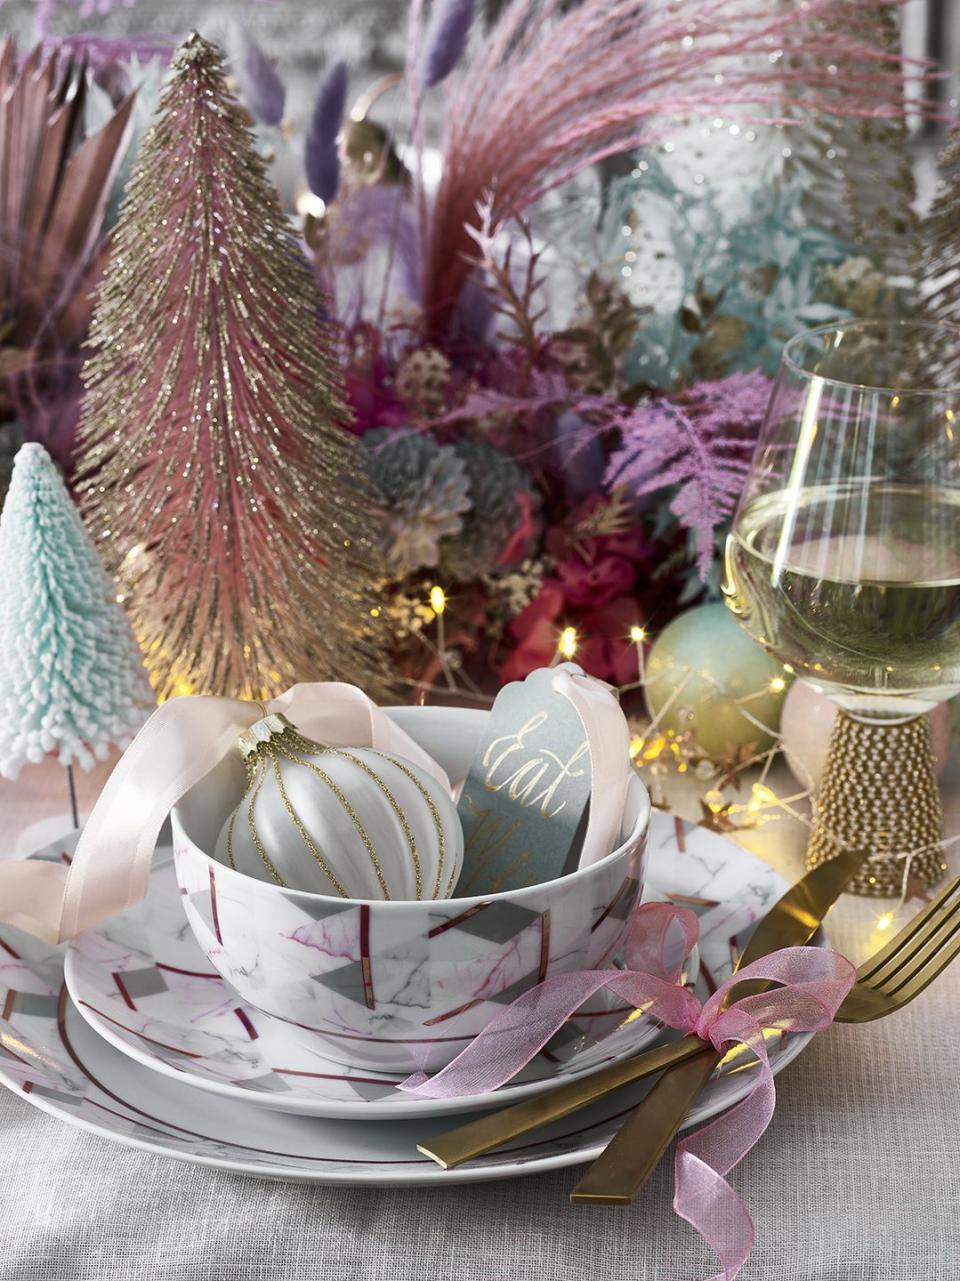 <p>Dazzle your dinner guests with gorgeous marble plates, miniature frosted trees, and fanciful baubles decorated in white and gold from George Home's Christmas range. </p>